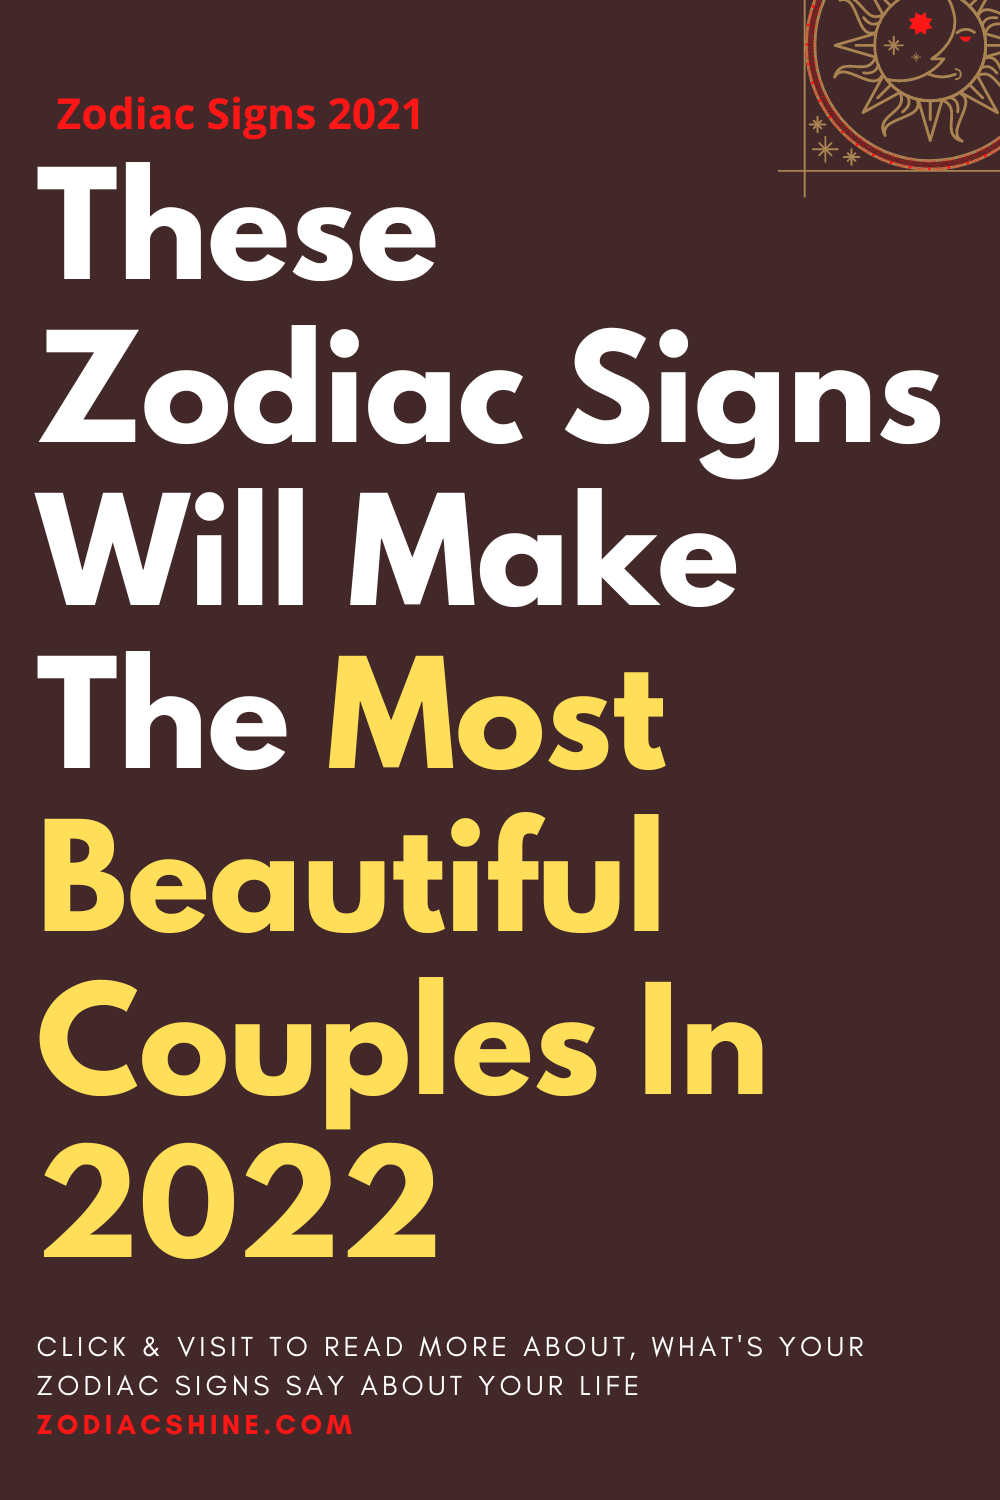 These Zodiac Signs Will Make The Most Beautiful Couples In 2022